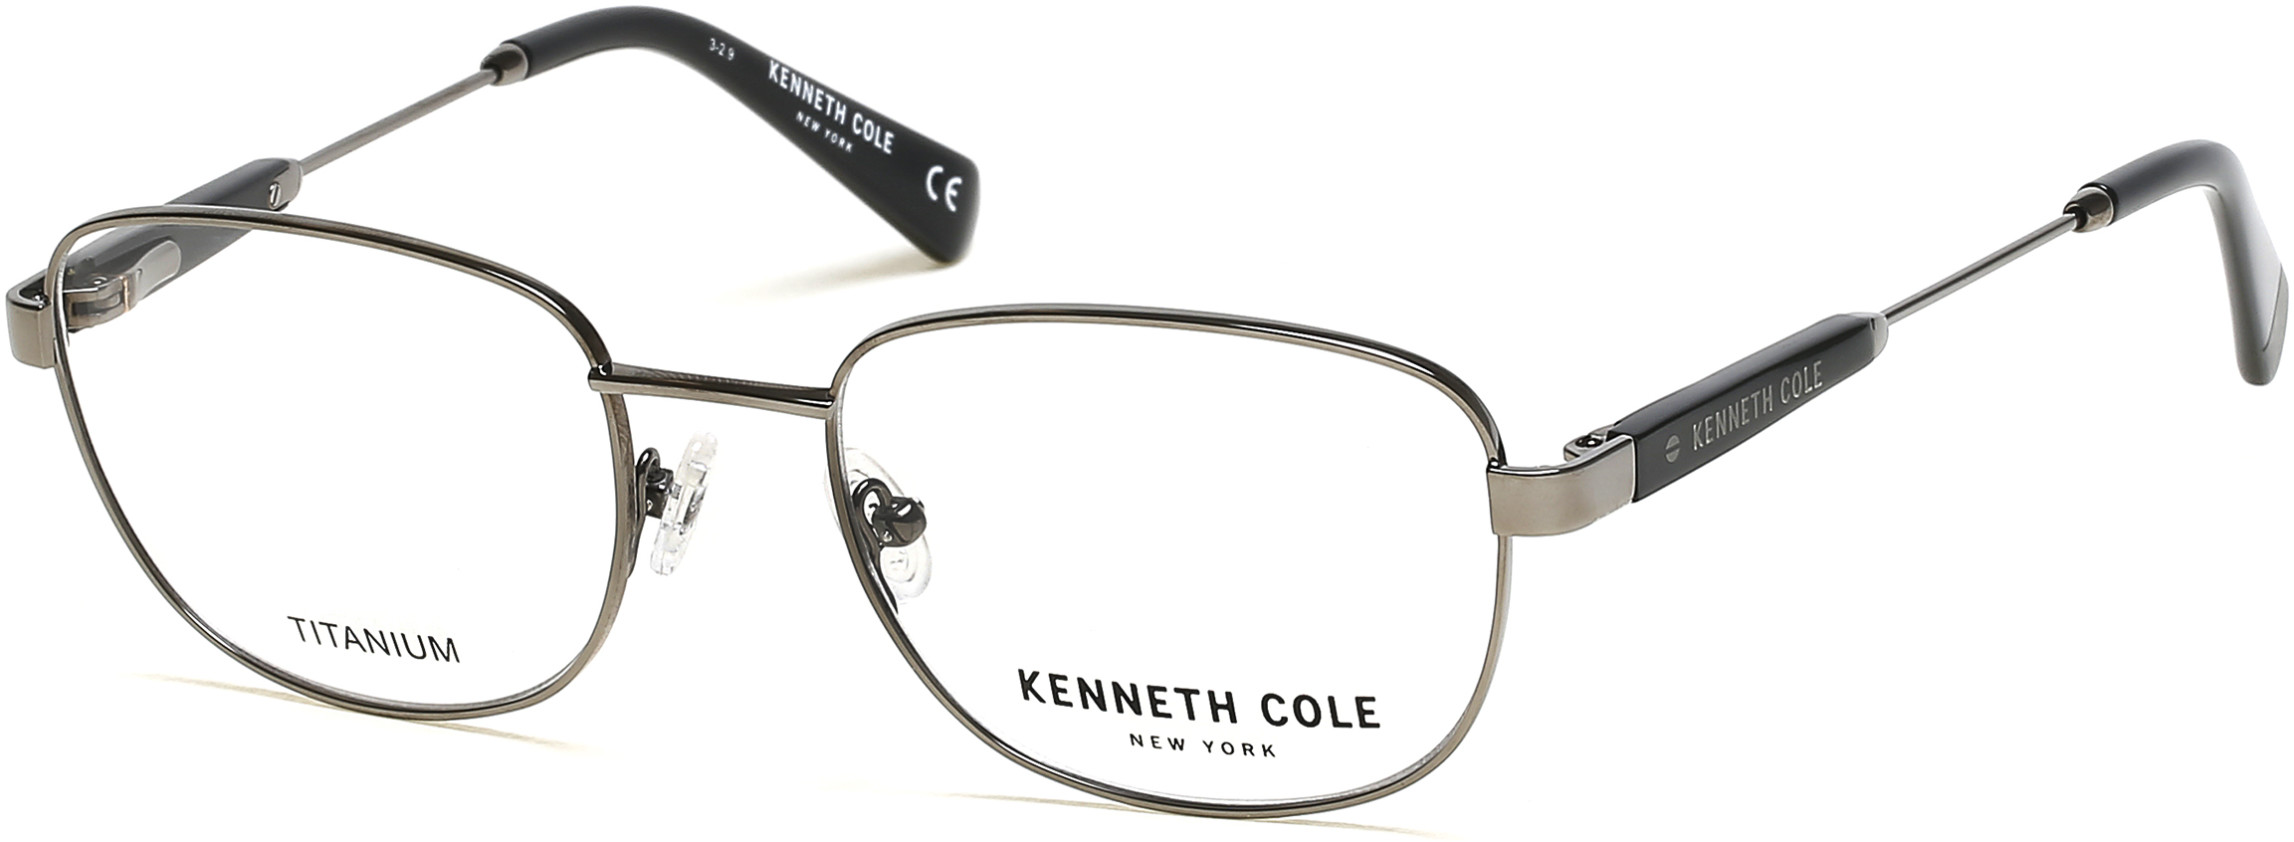 KENNETH COLE NY 0299 008